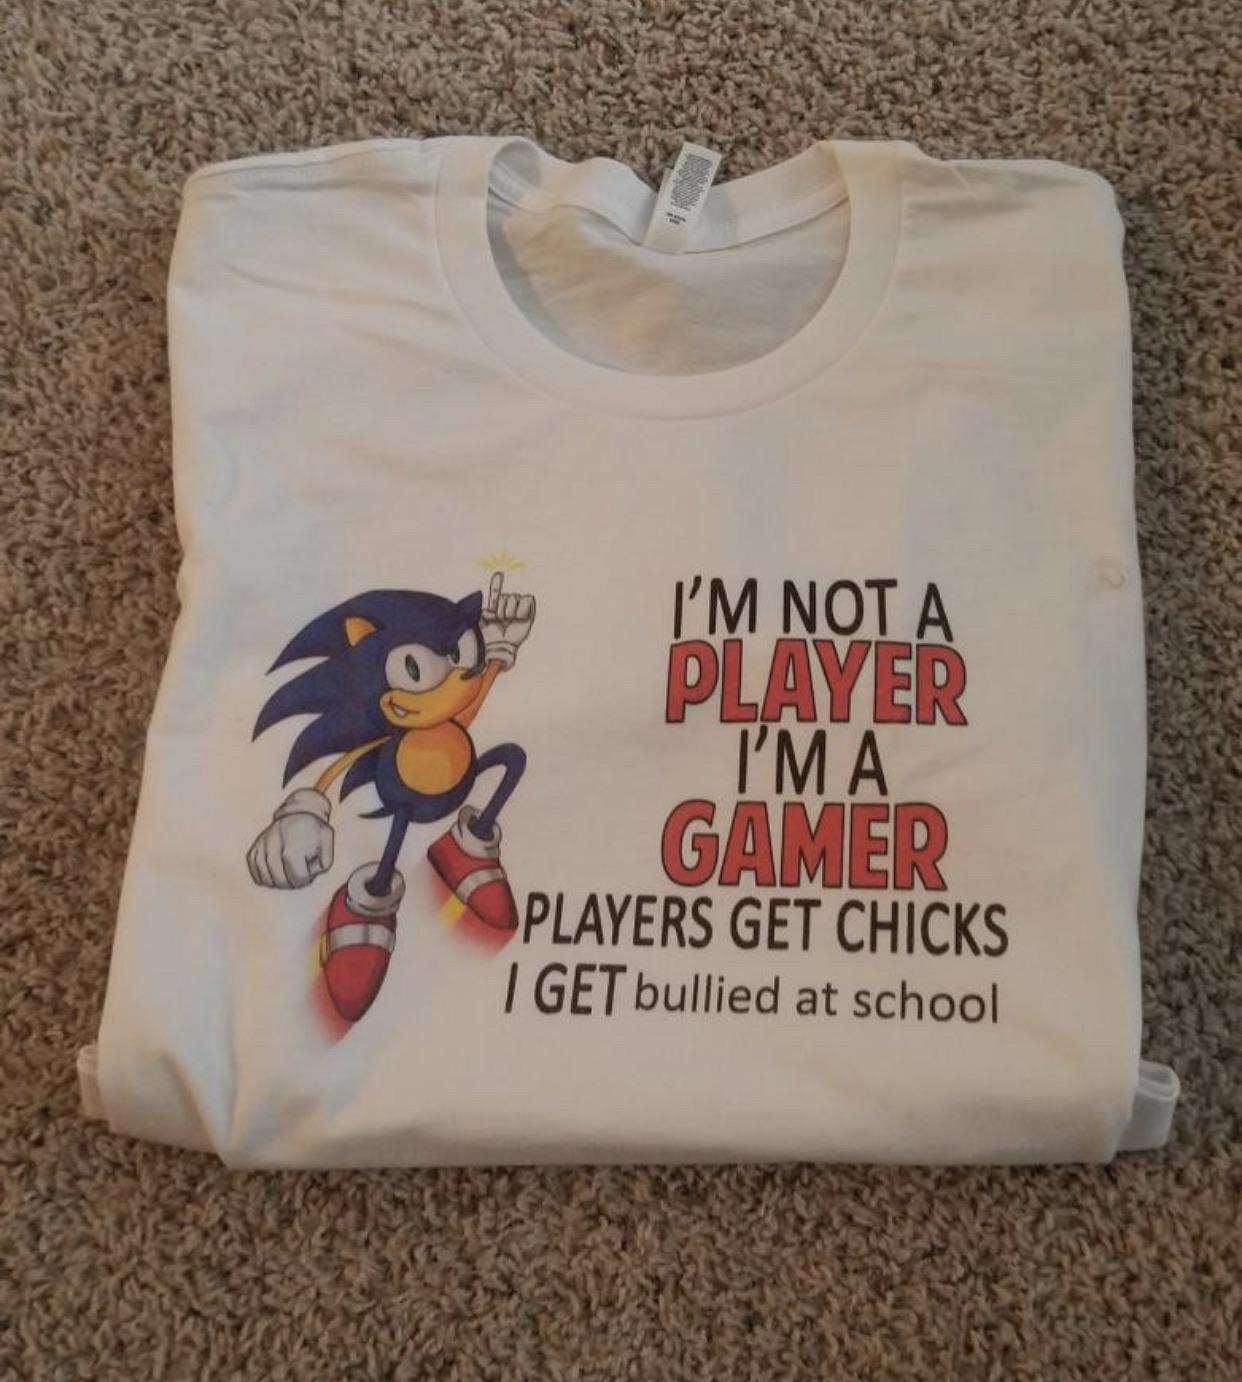 funny gaming memes - i m not a player i m a gamer reddit - fa I'M Not A Player I'M A Gamer Players Get Chicks I Get bullied at school